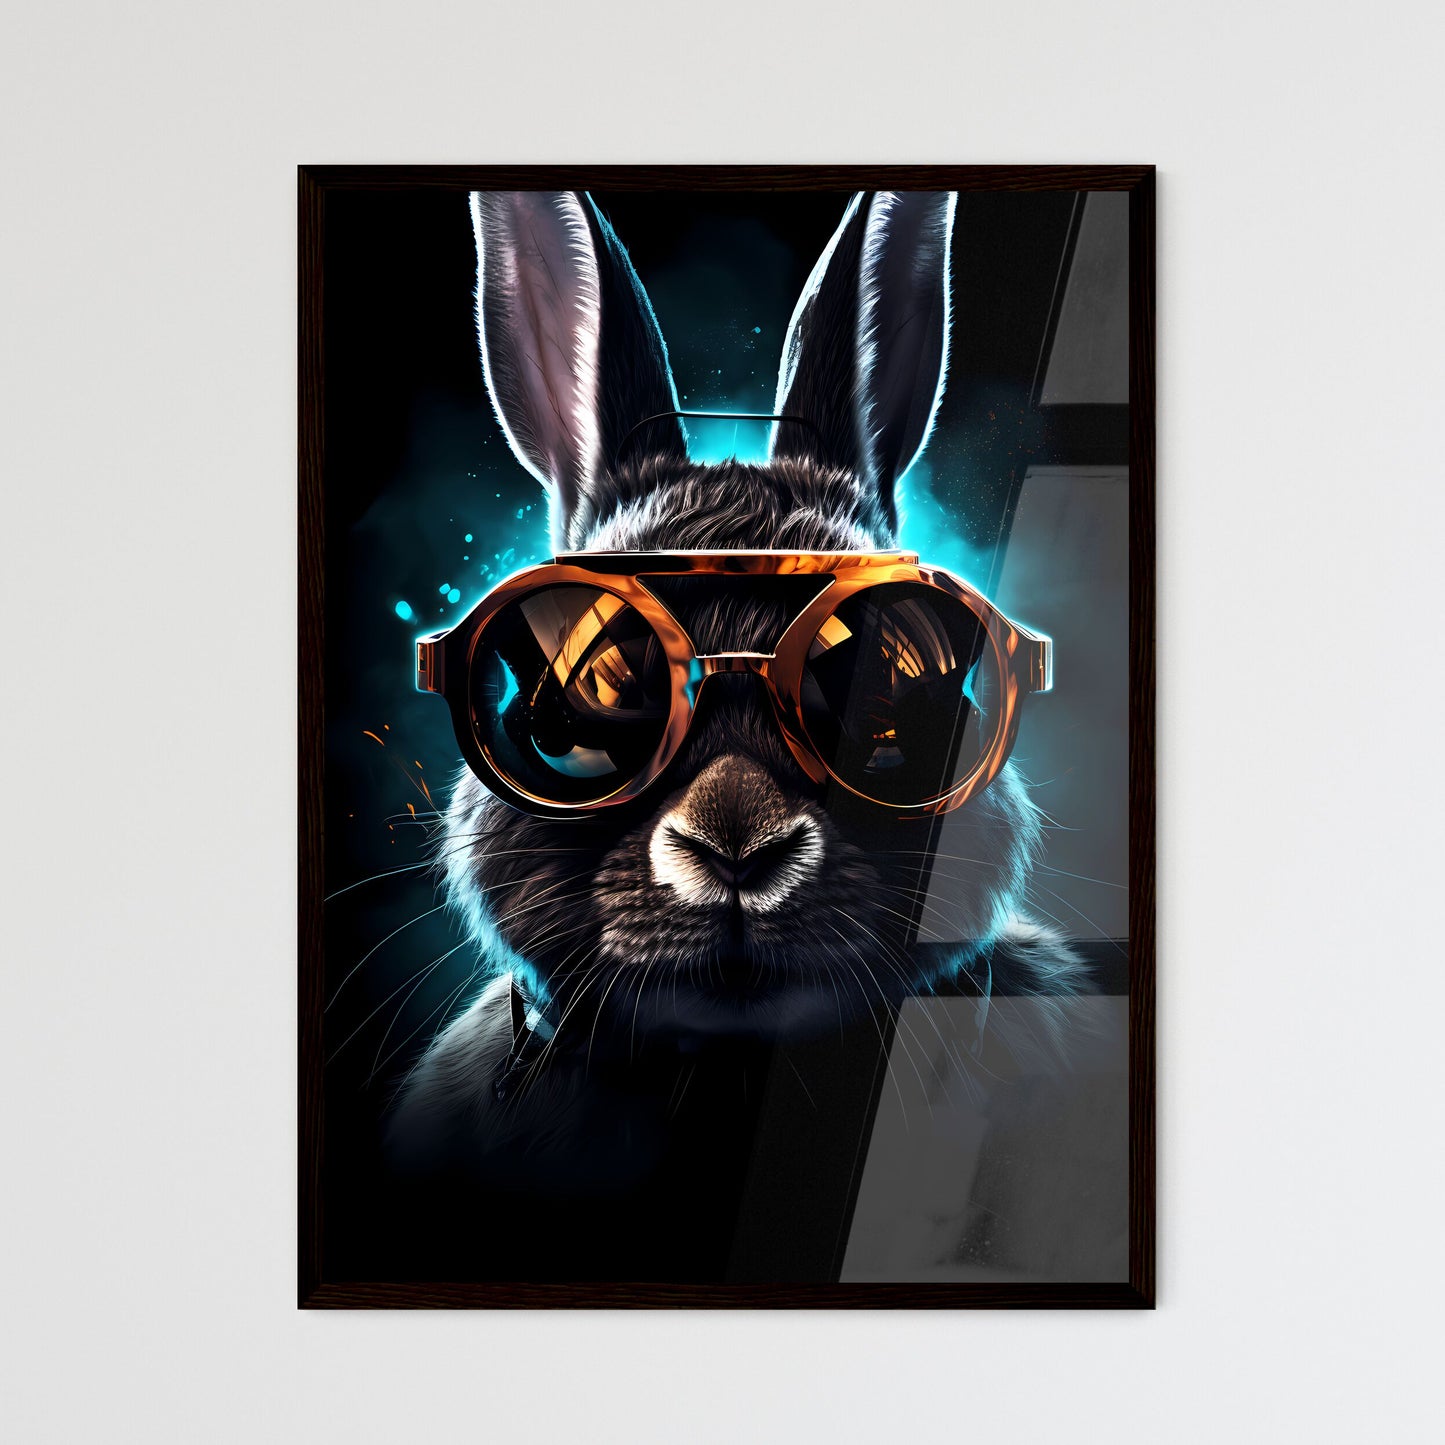 A Poster of A rabbit wearing dark glasses - A Rabbit Wearing Sunglasses Default Title